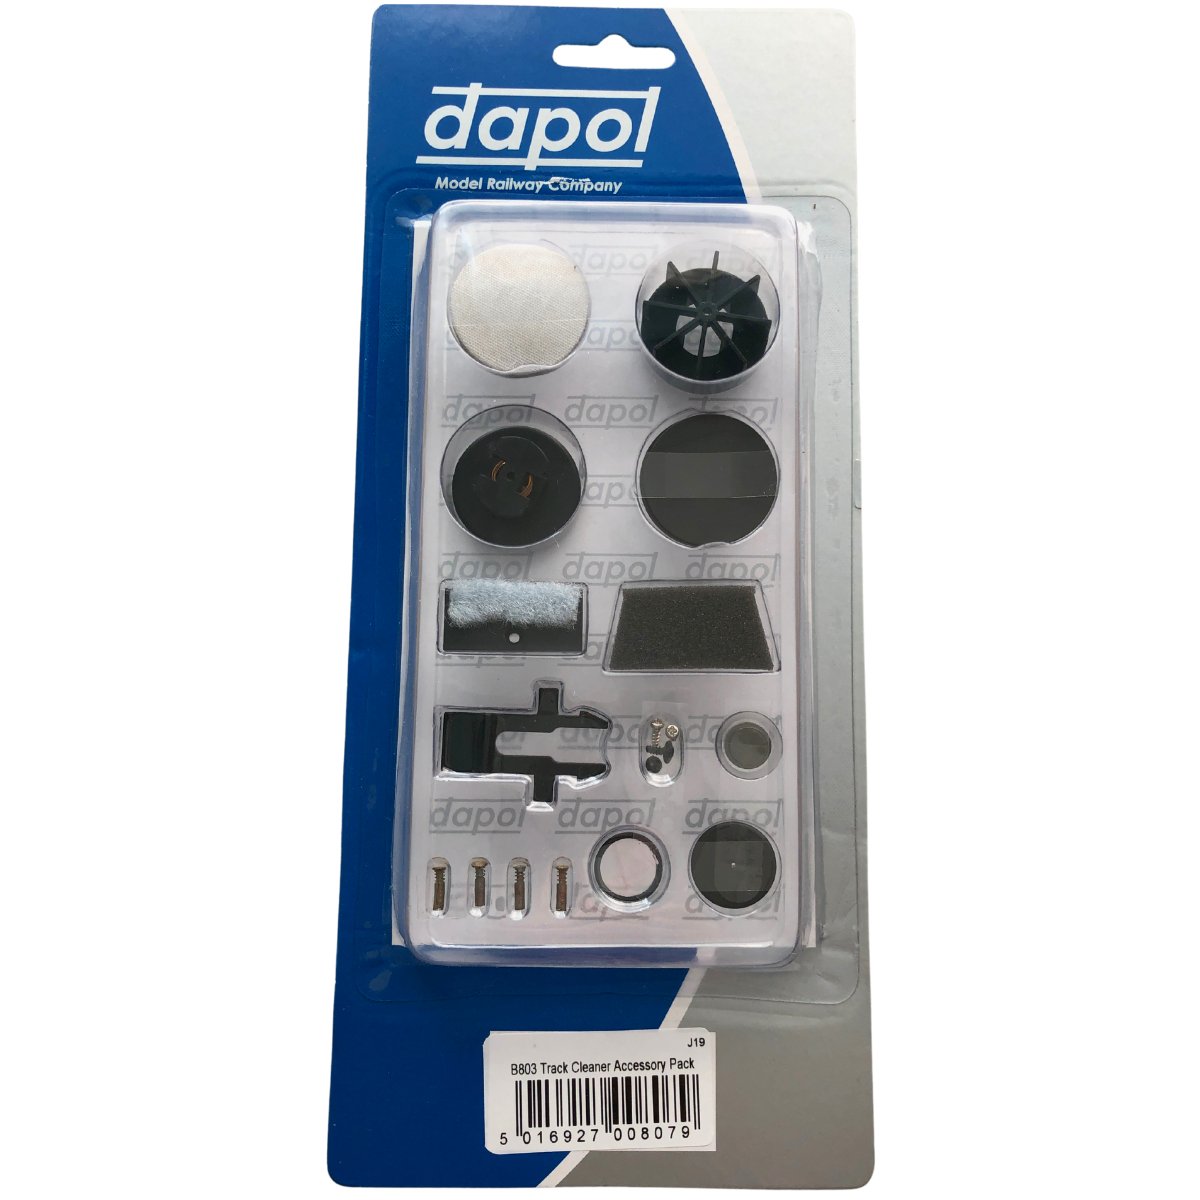 Dapol B803 Track Cleaner Accessory Pack